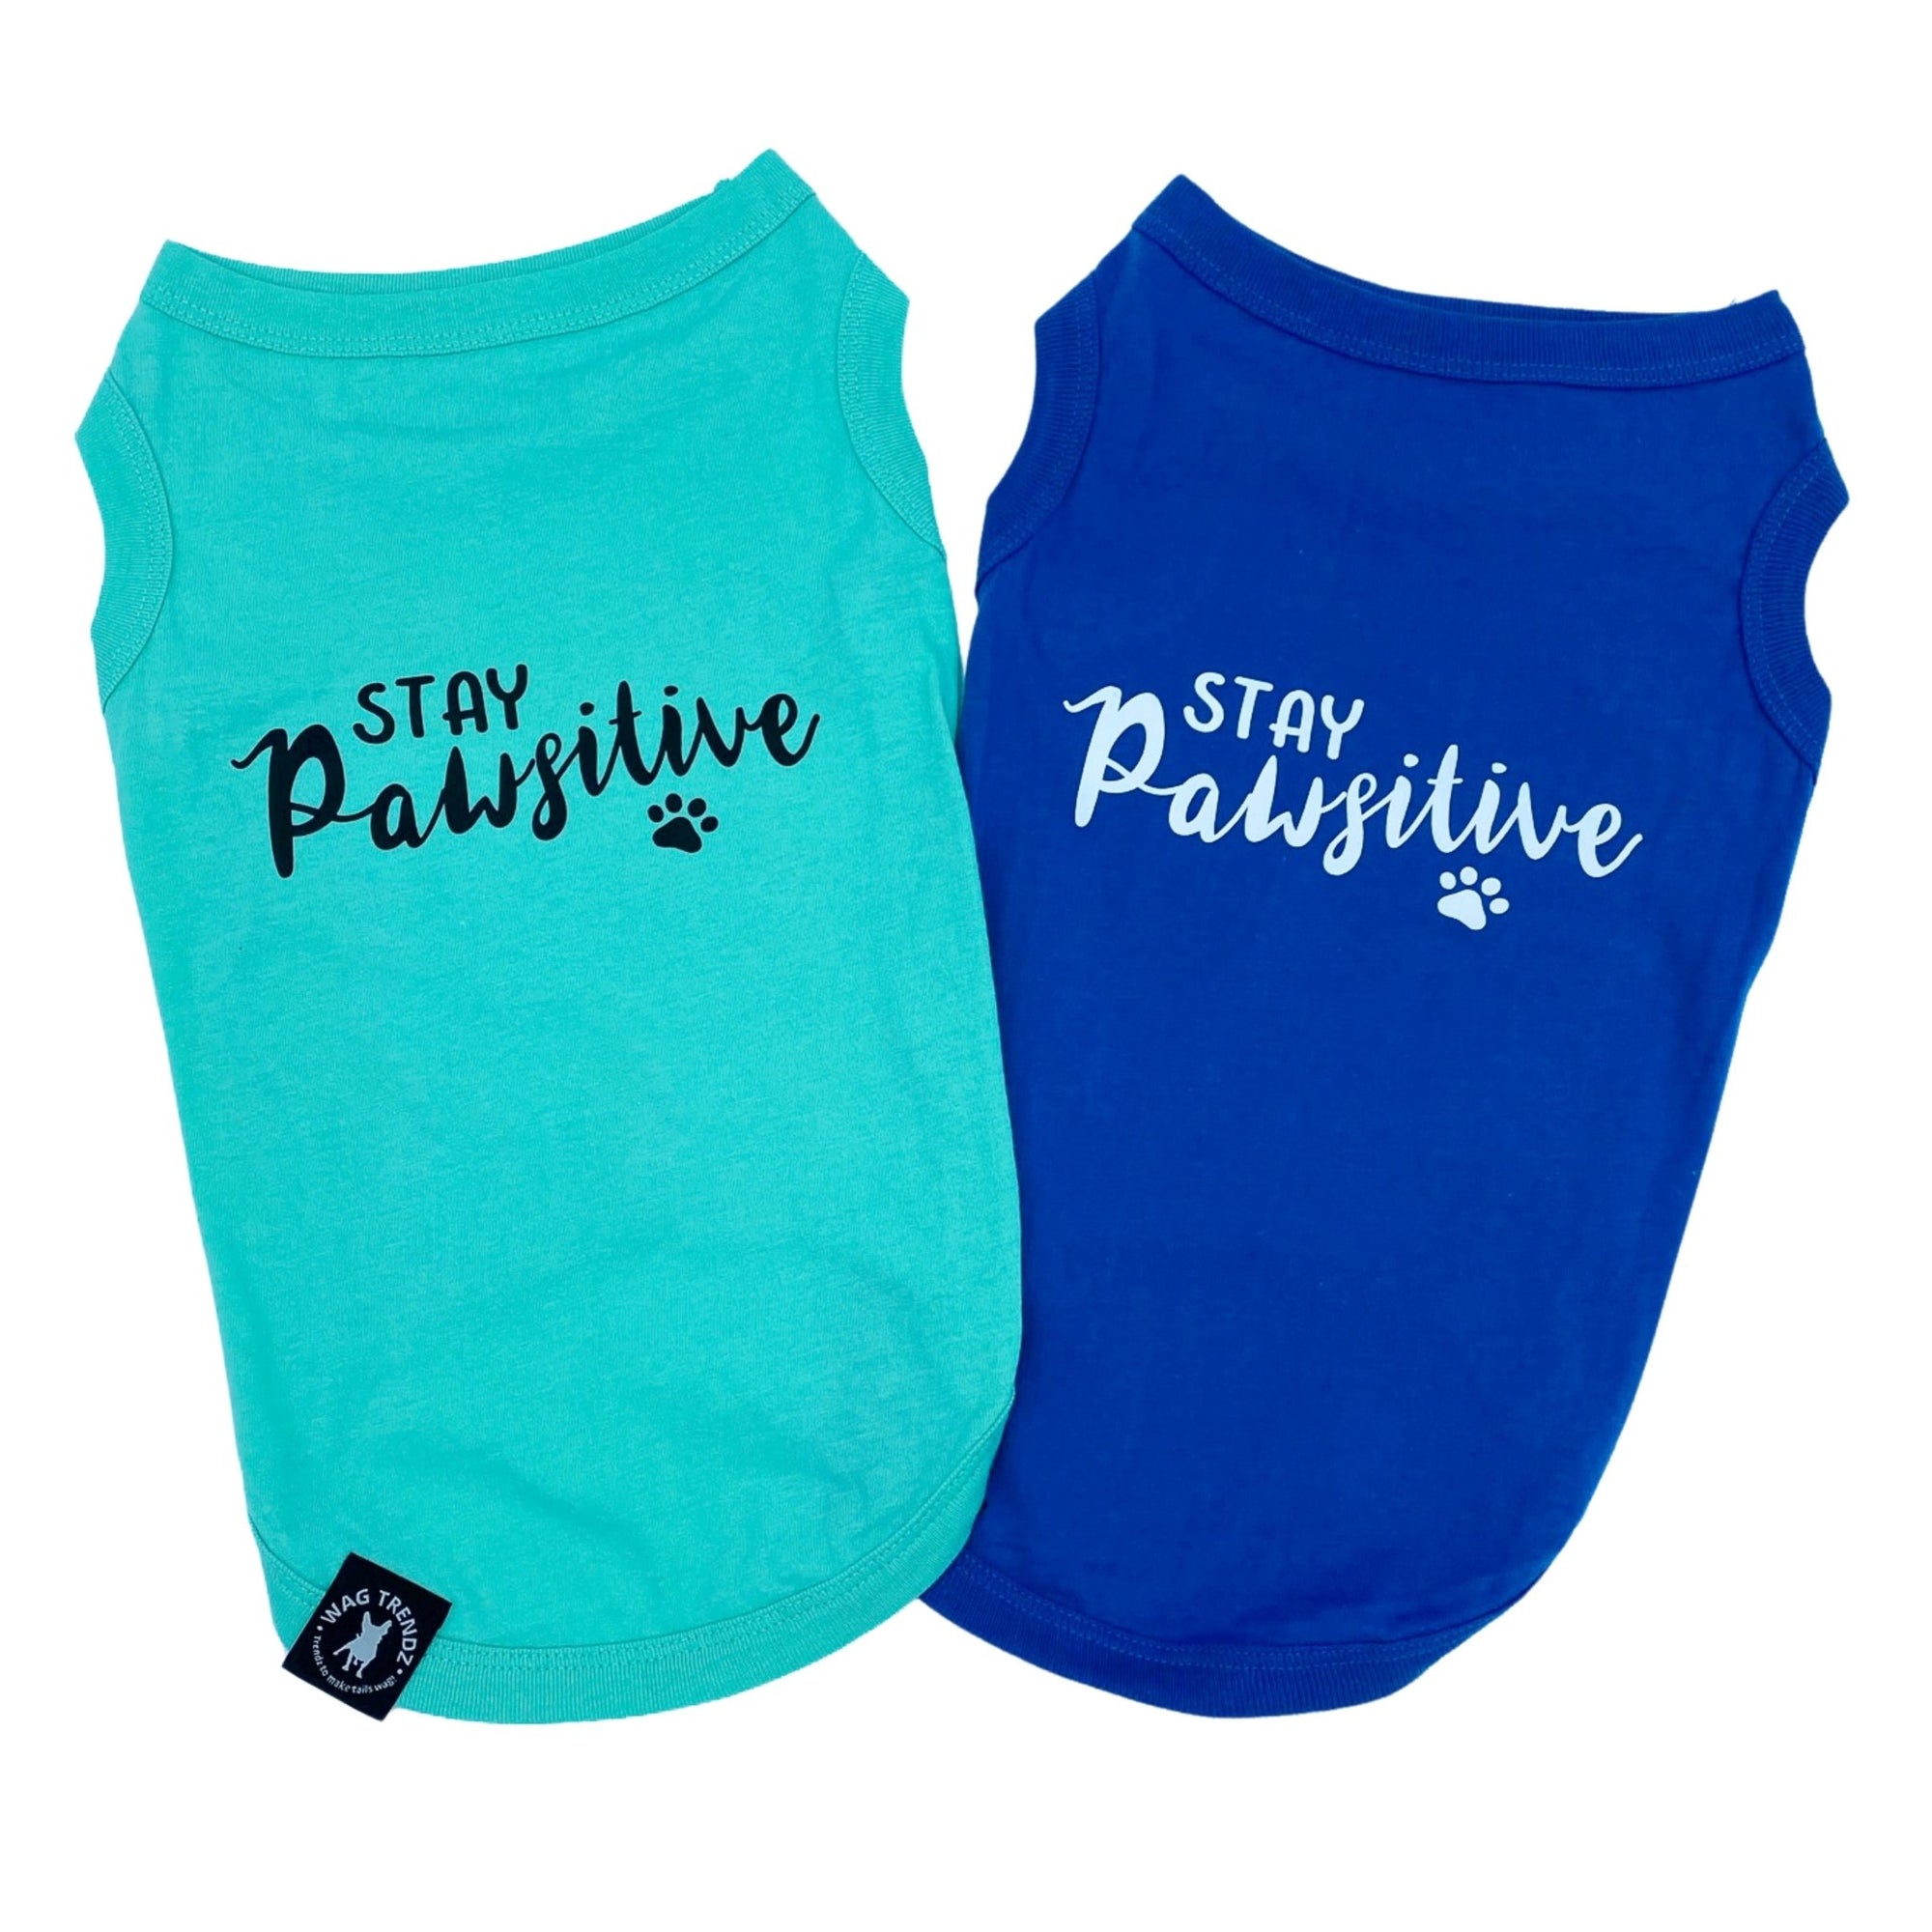 Dog T-Shirt - &quot;Stay Pawsitive&quot; - Teal and Royal Blue dog t-shirts - Stay Pawsitive lettering in black with paw print on teal t-shirt and white lettering on blue t-shirt - against solid white background - Wag Trendz